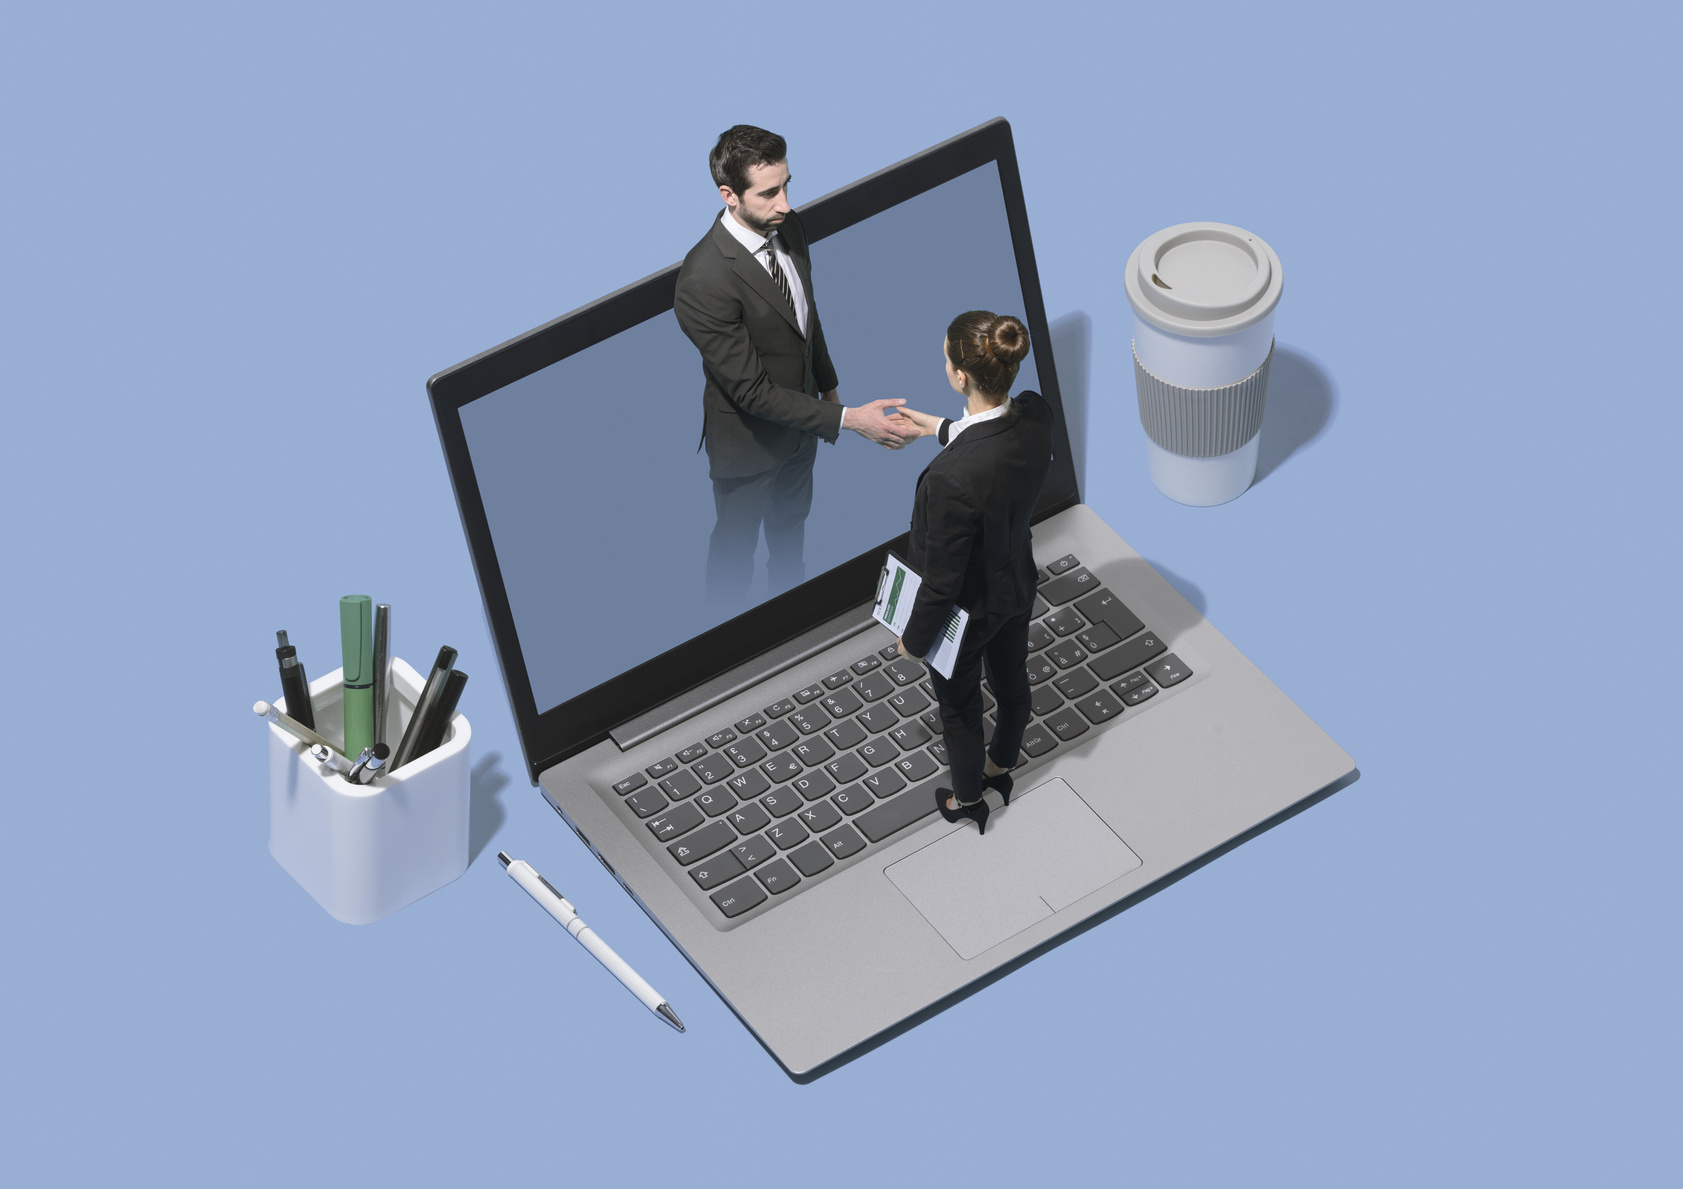 Business people meeting online and shaking hands